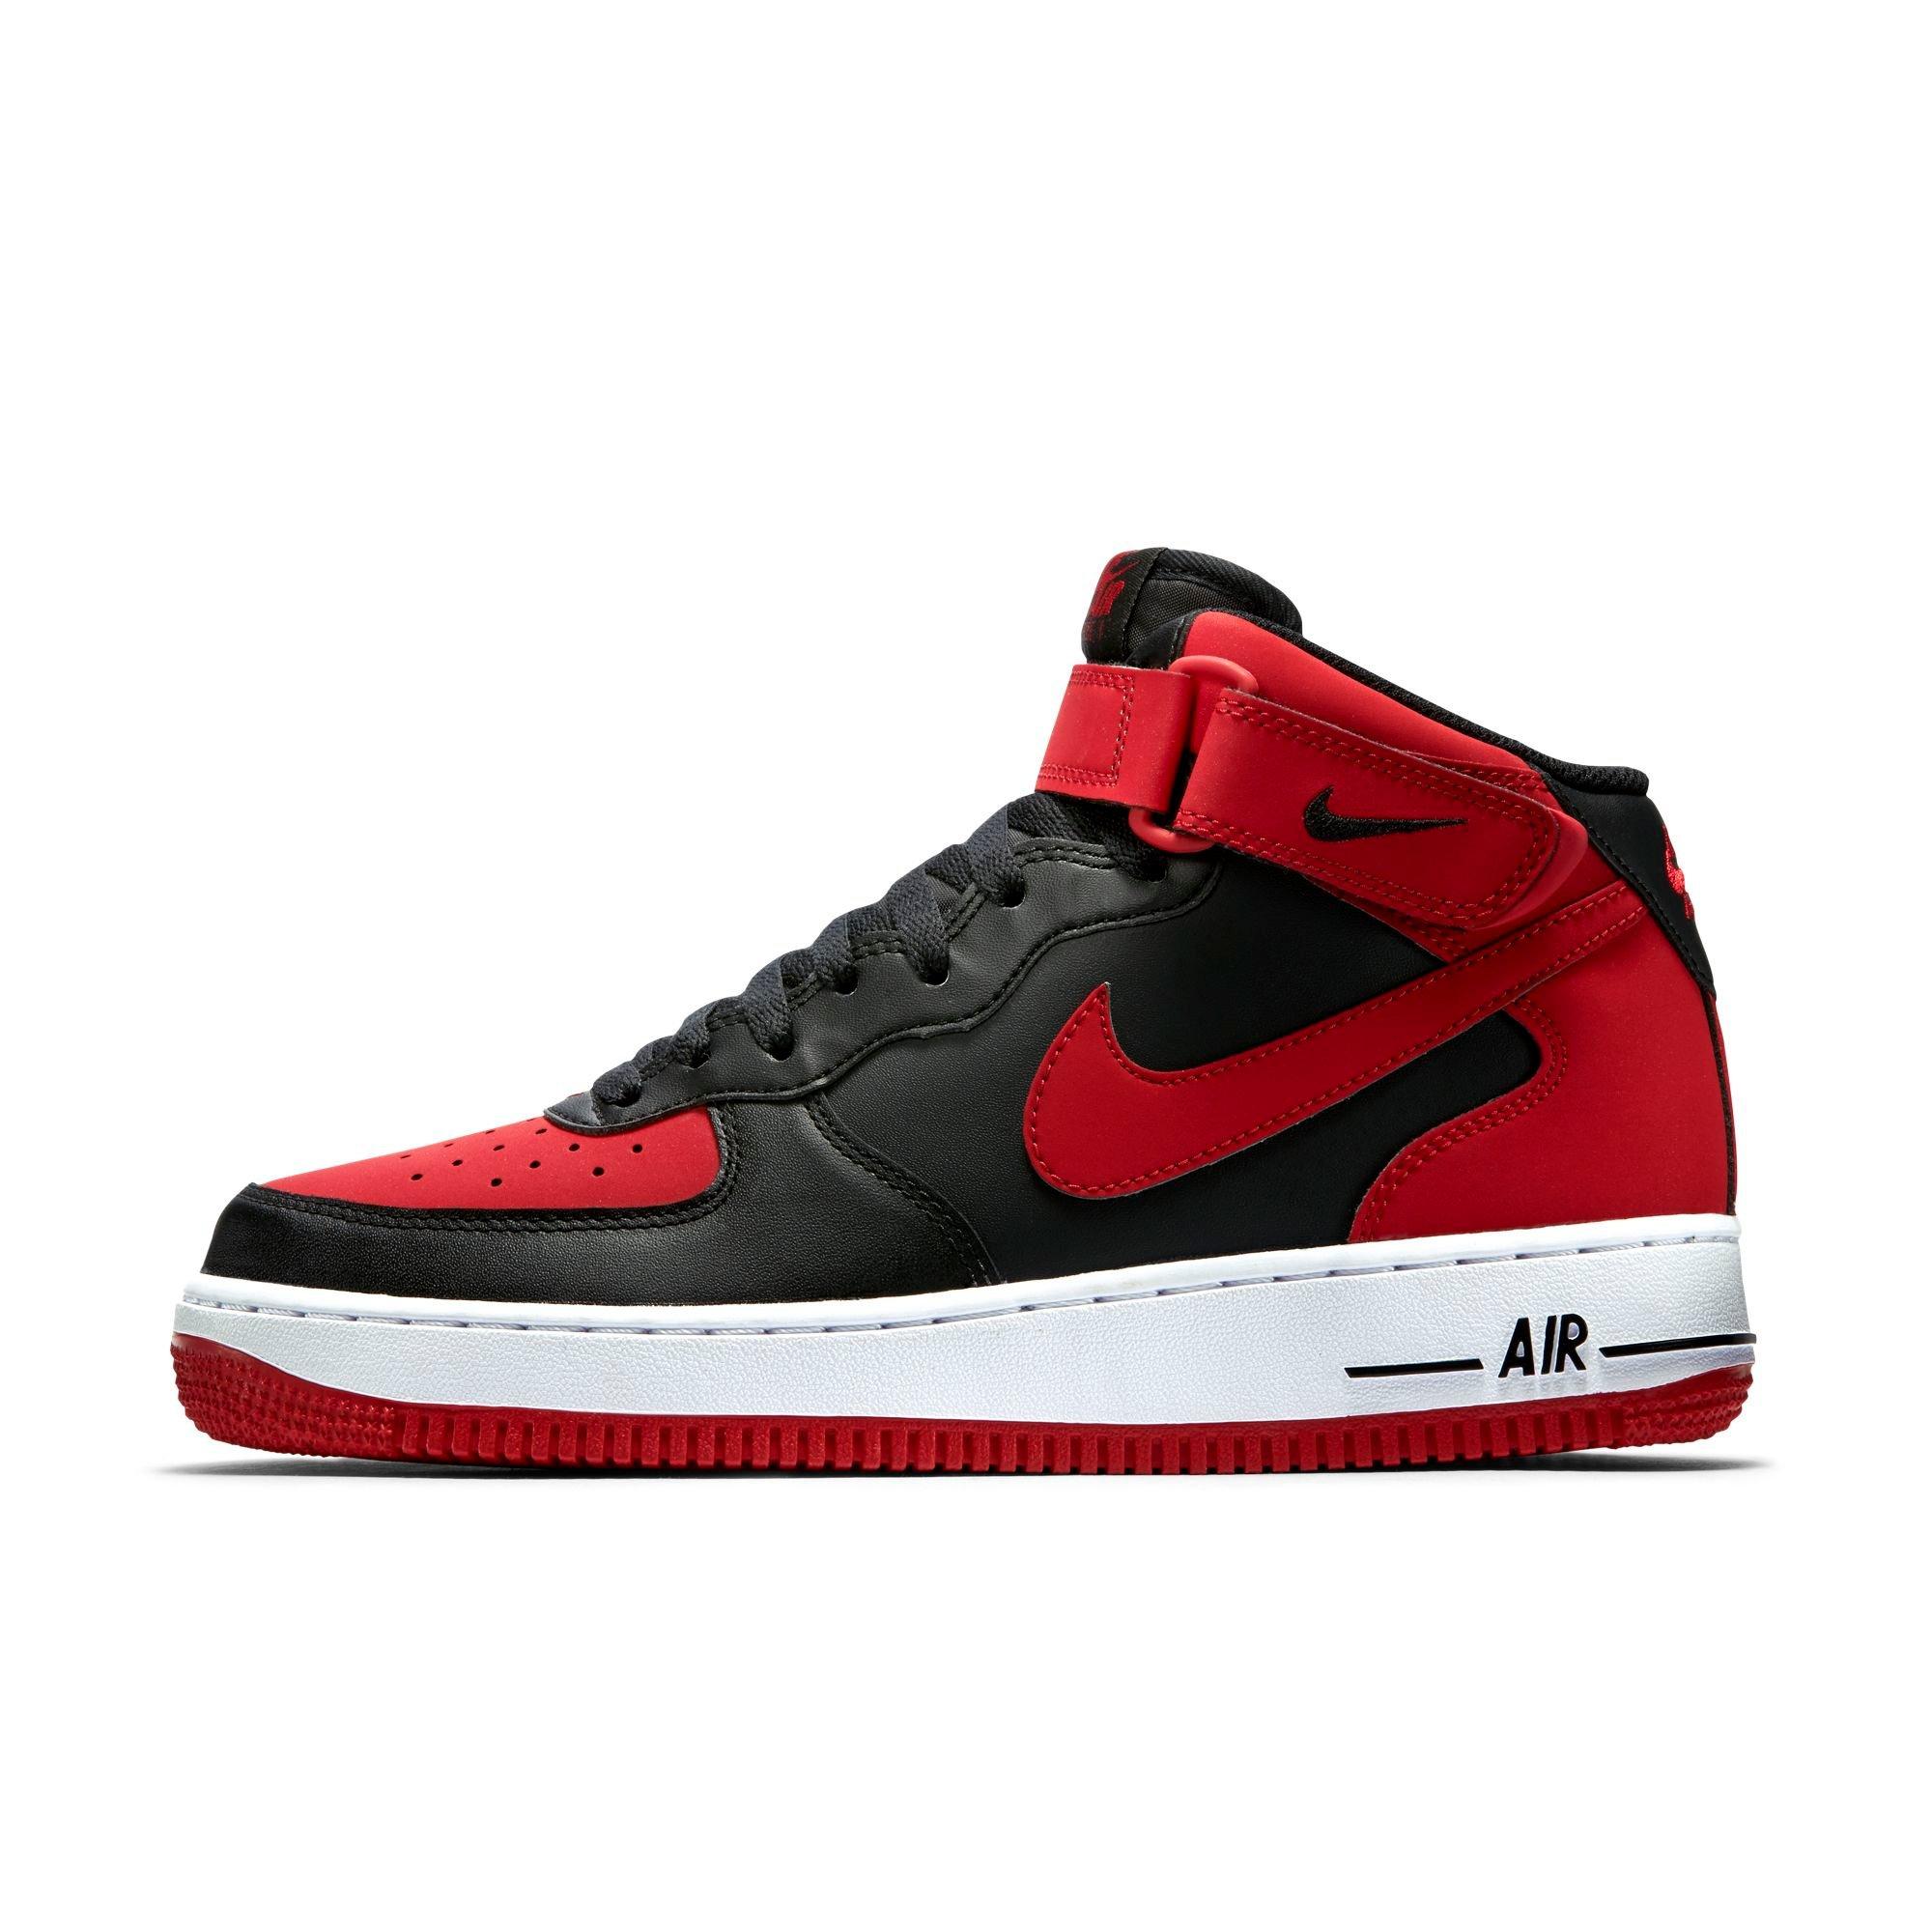 nike air force 1 red and black high top